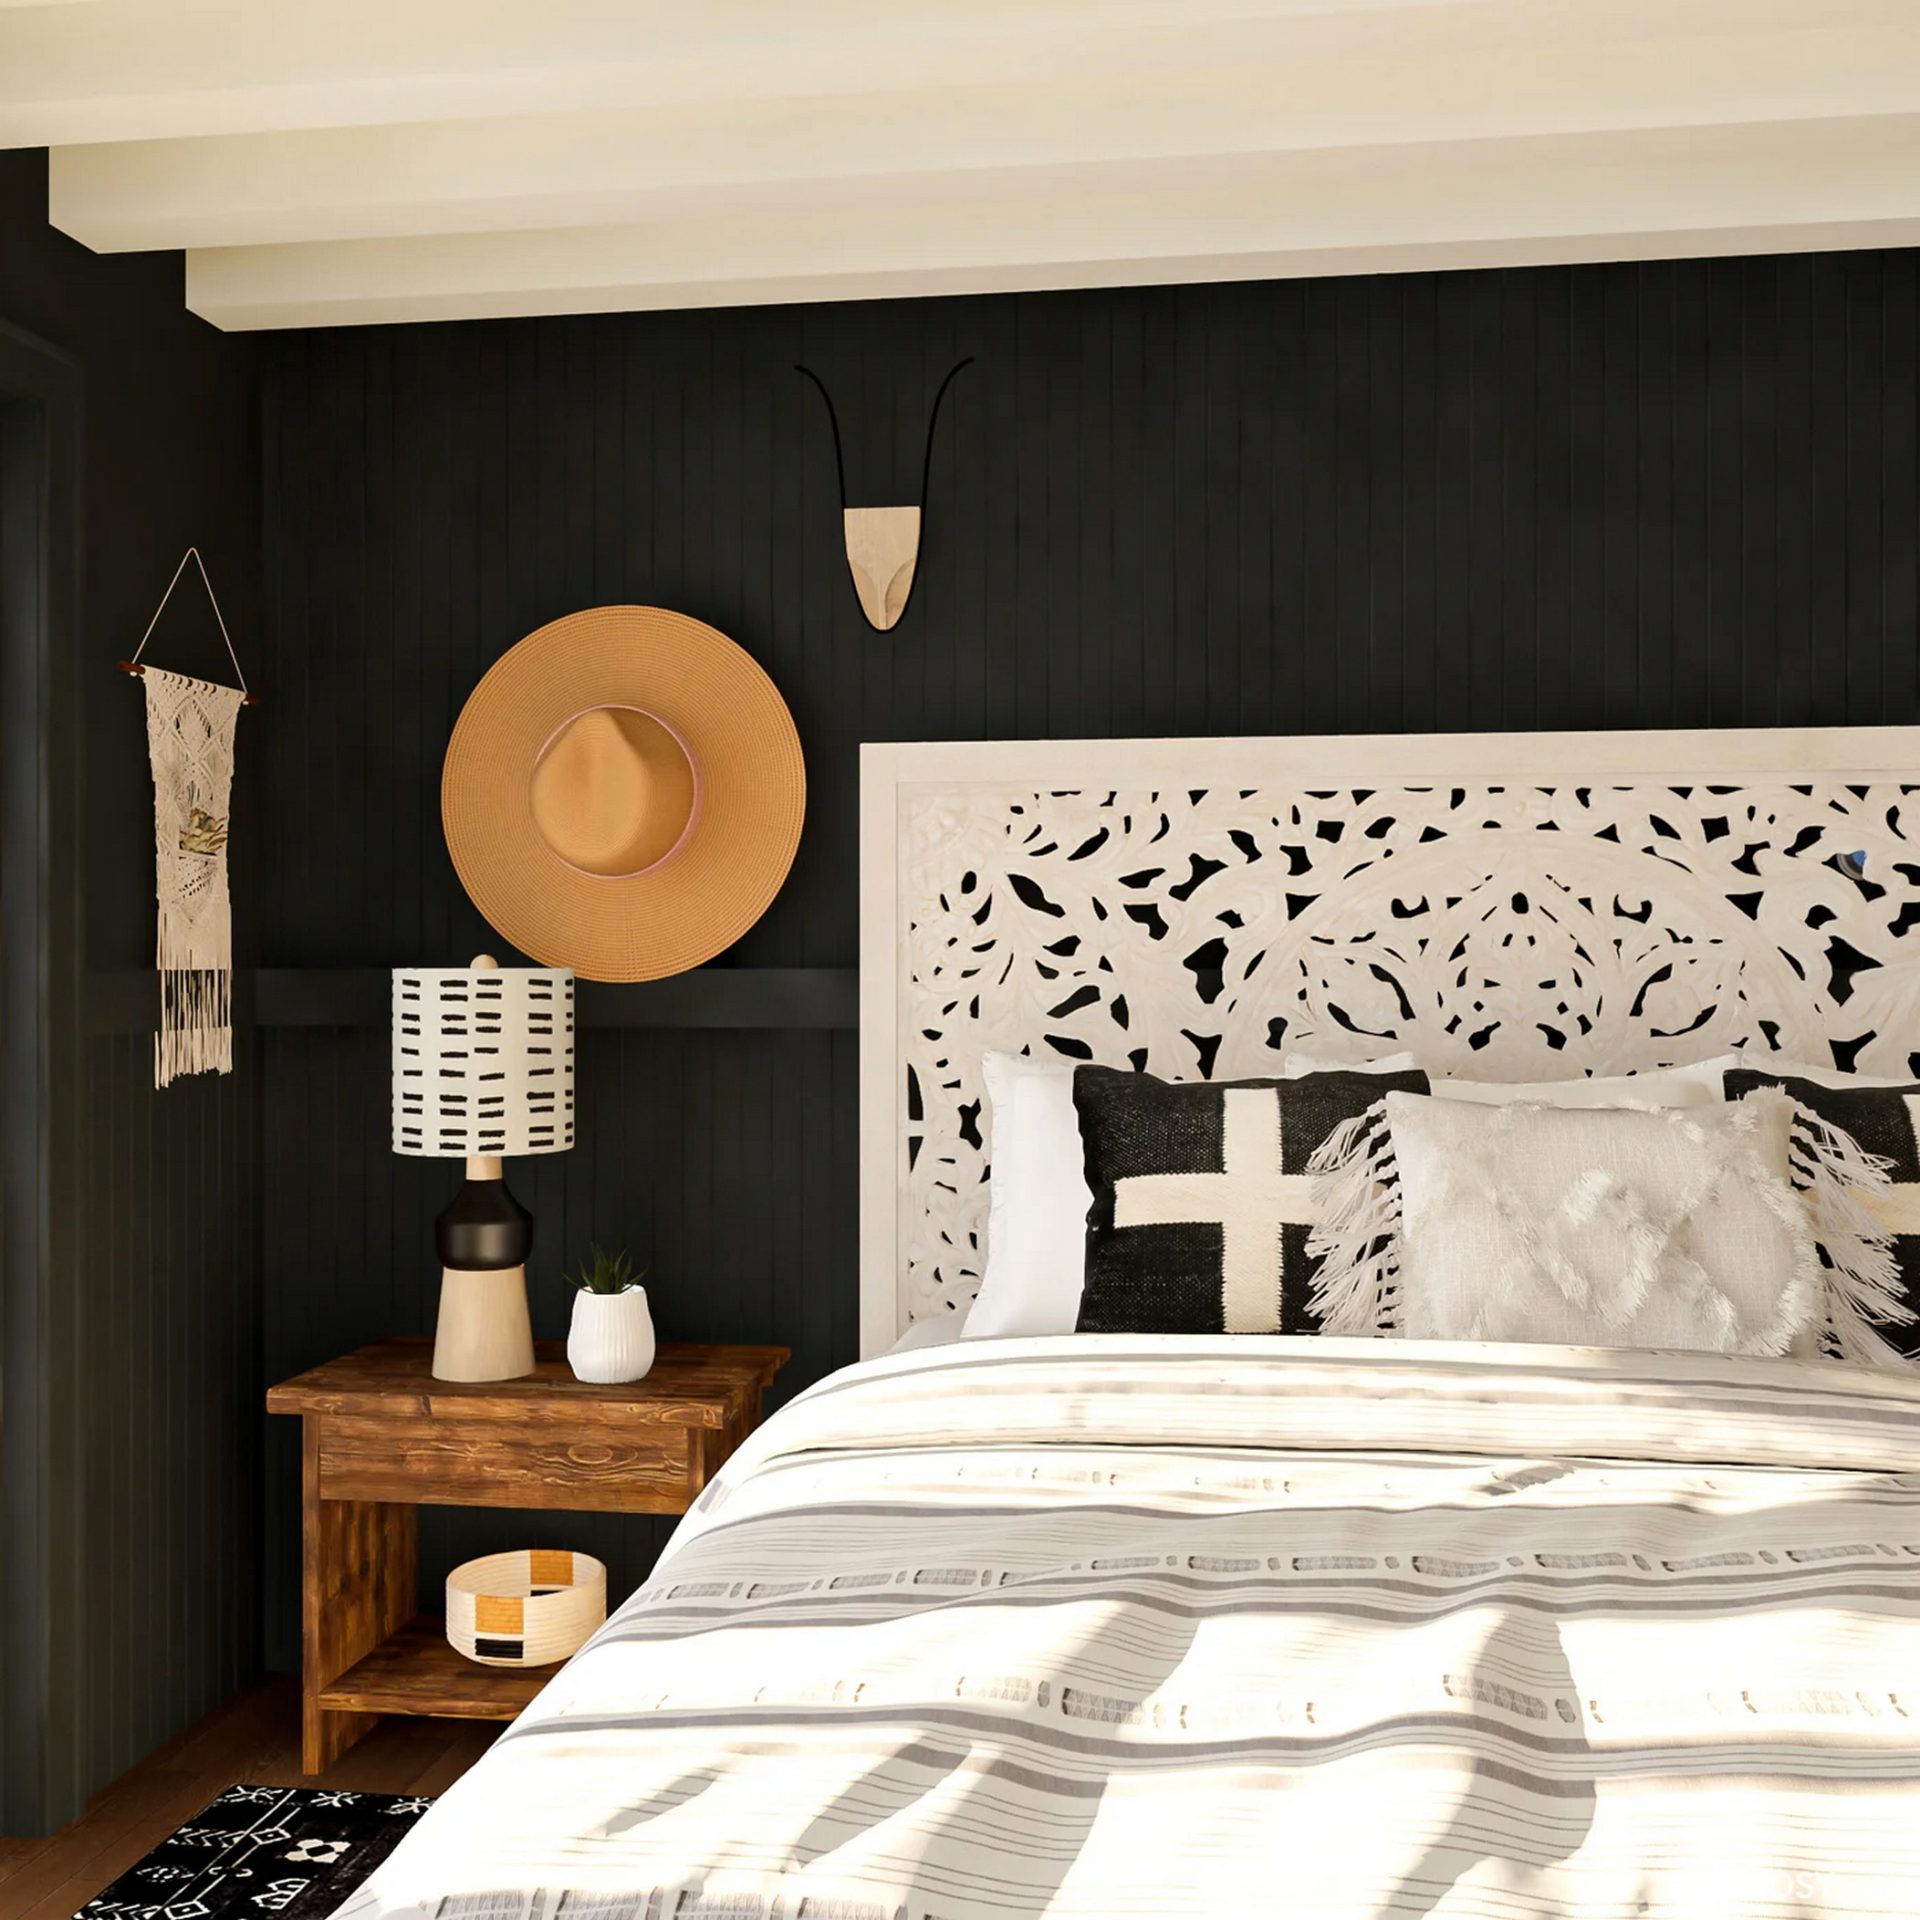 Headboard Ideas to Make a Statement in Your Bedroom